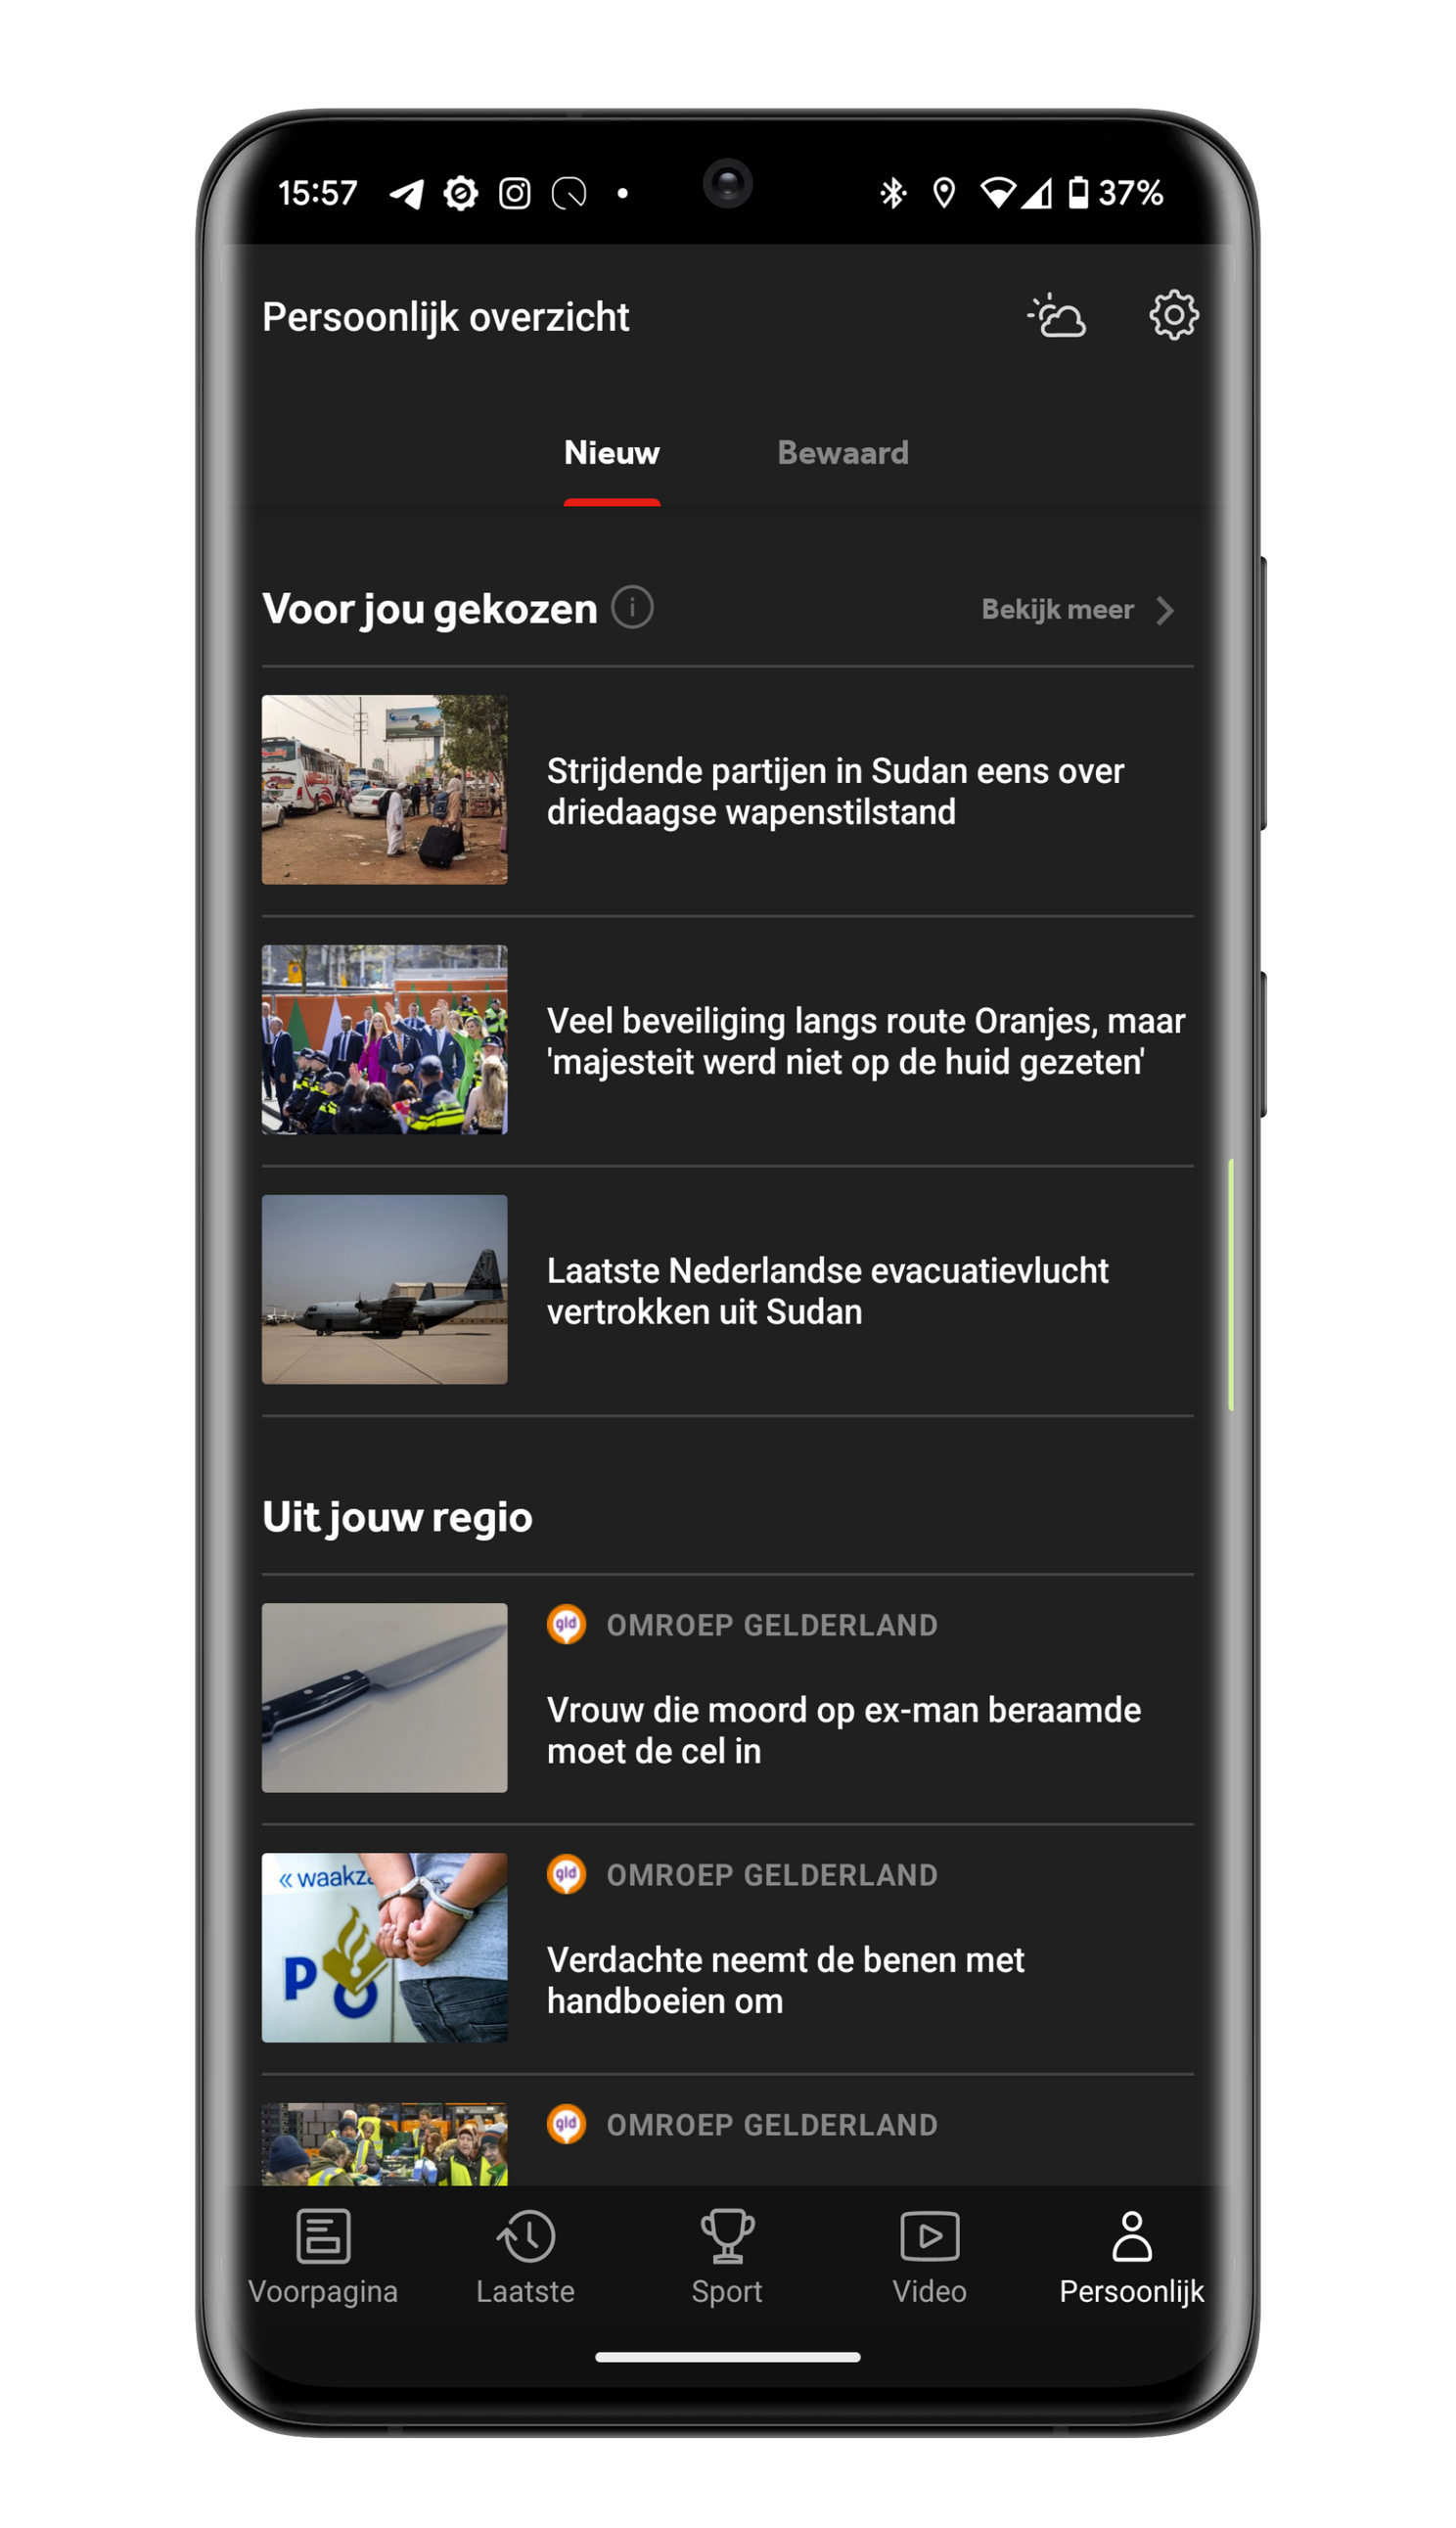 These 2 Dutch apps are now getting an interesting update